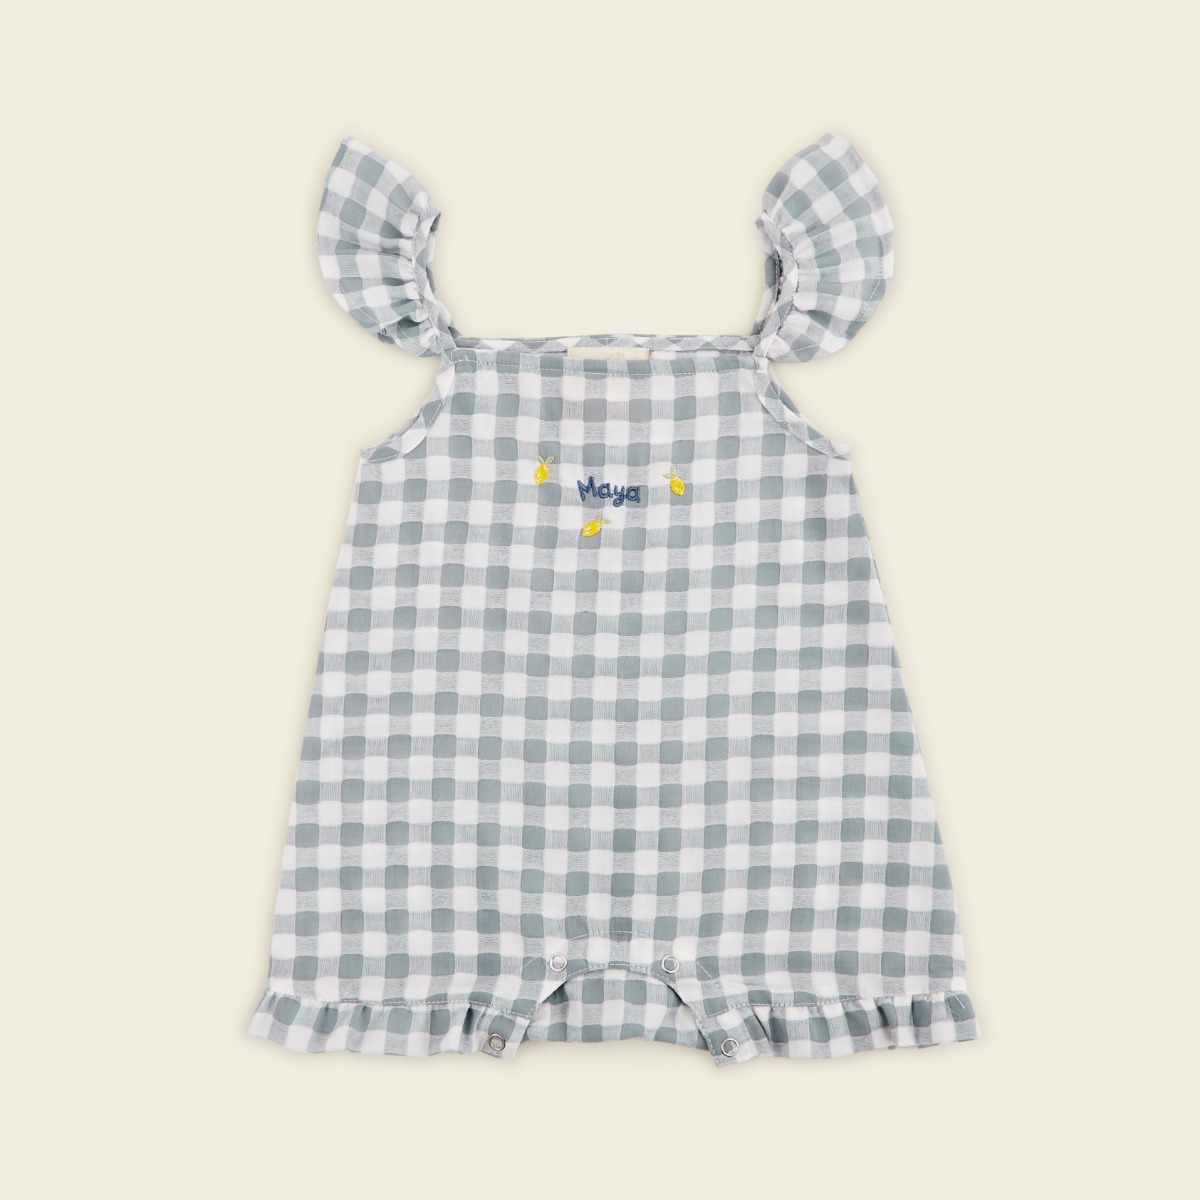 Personalised Grey and White Plaid Romper by VIGNETTE